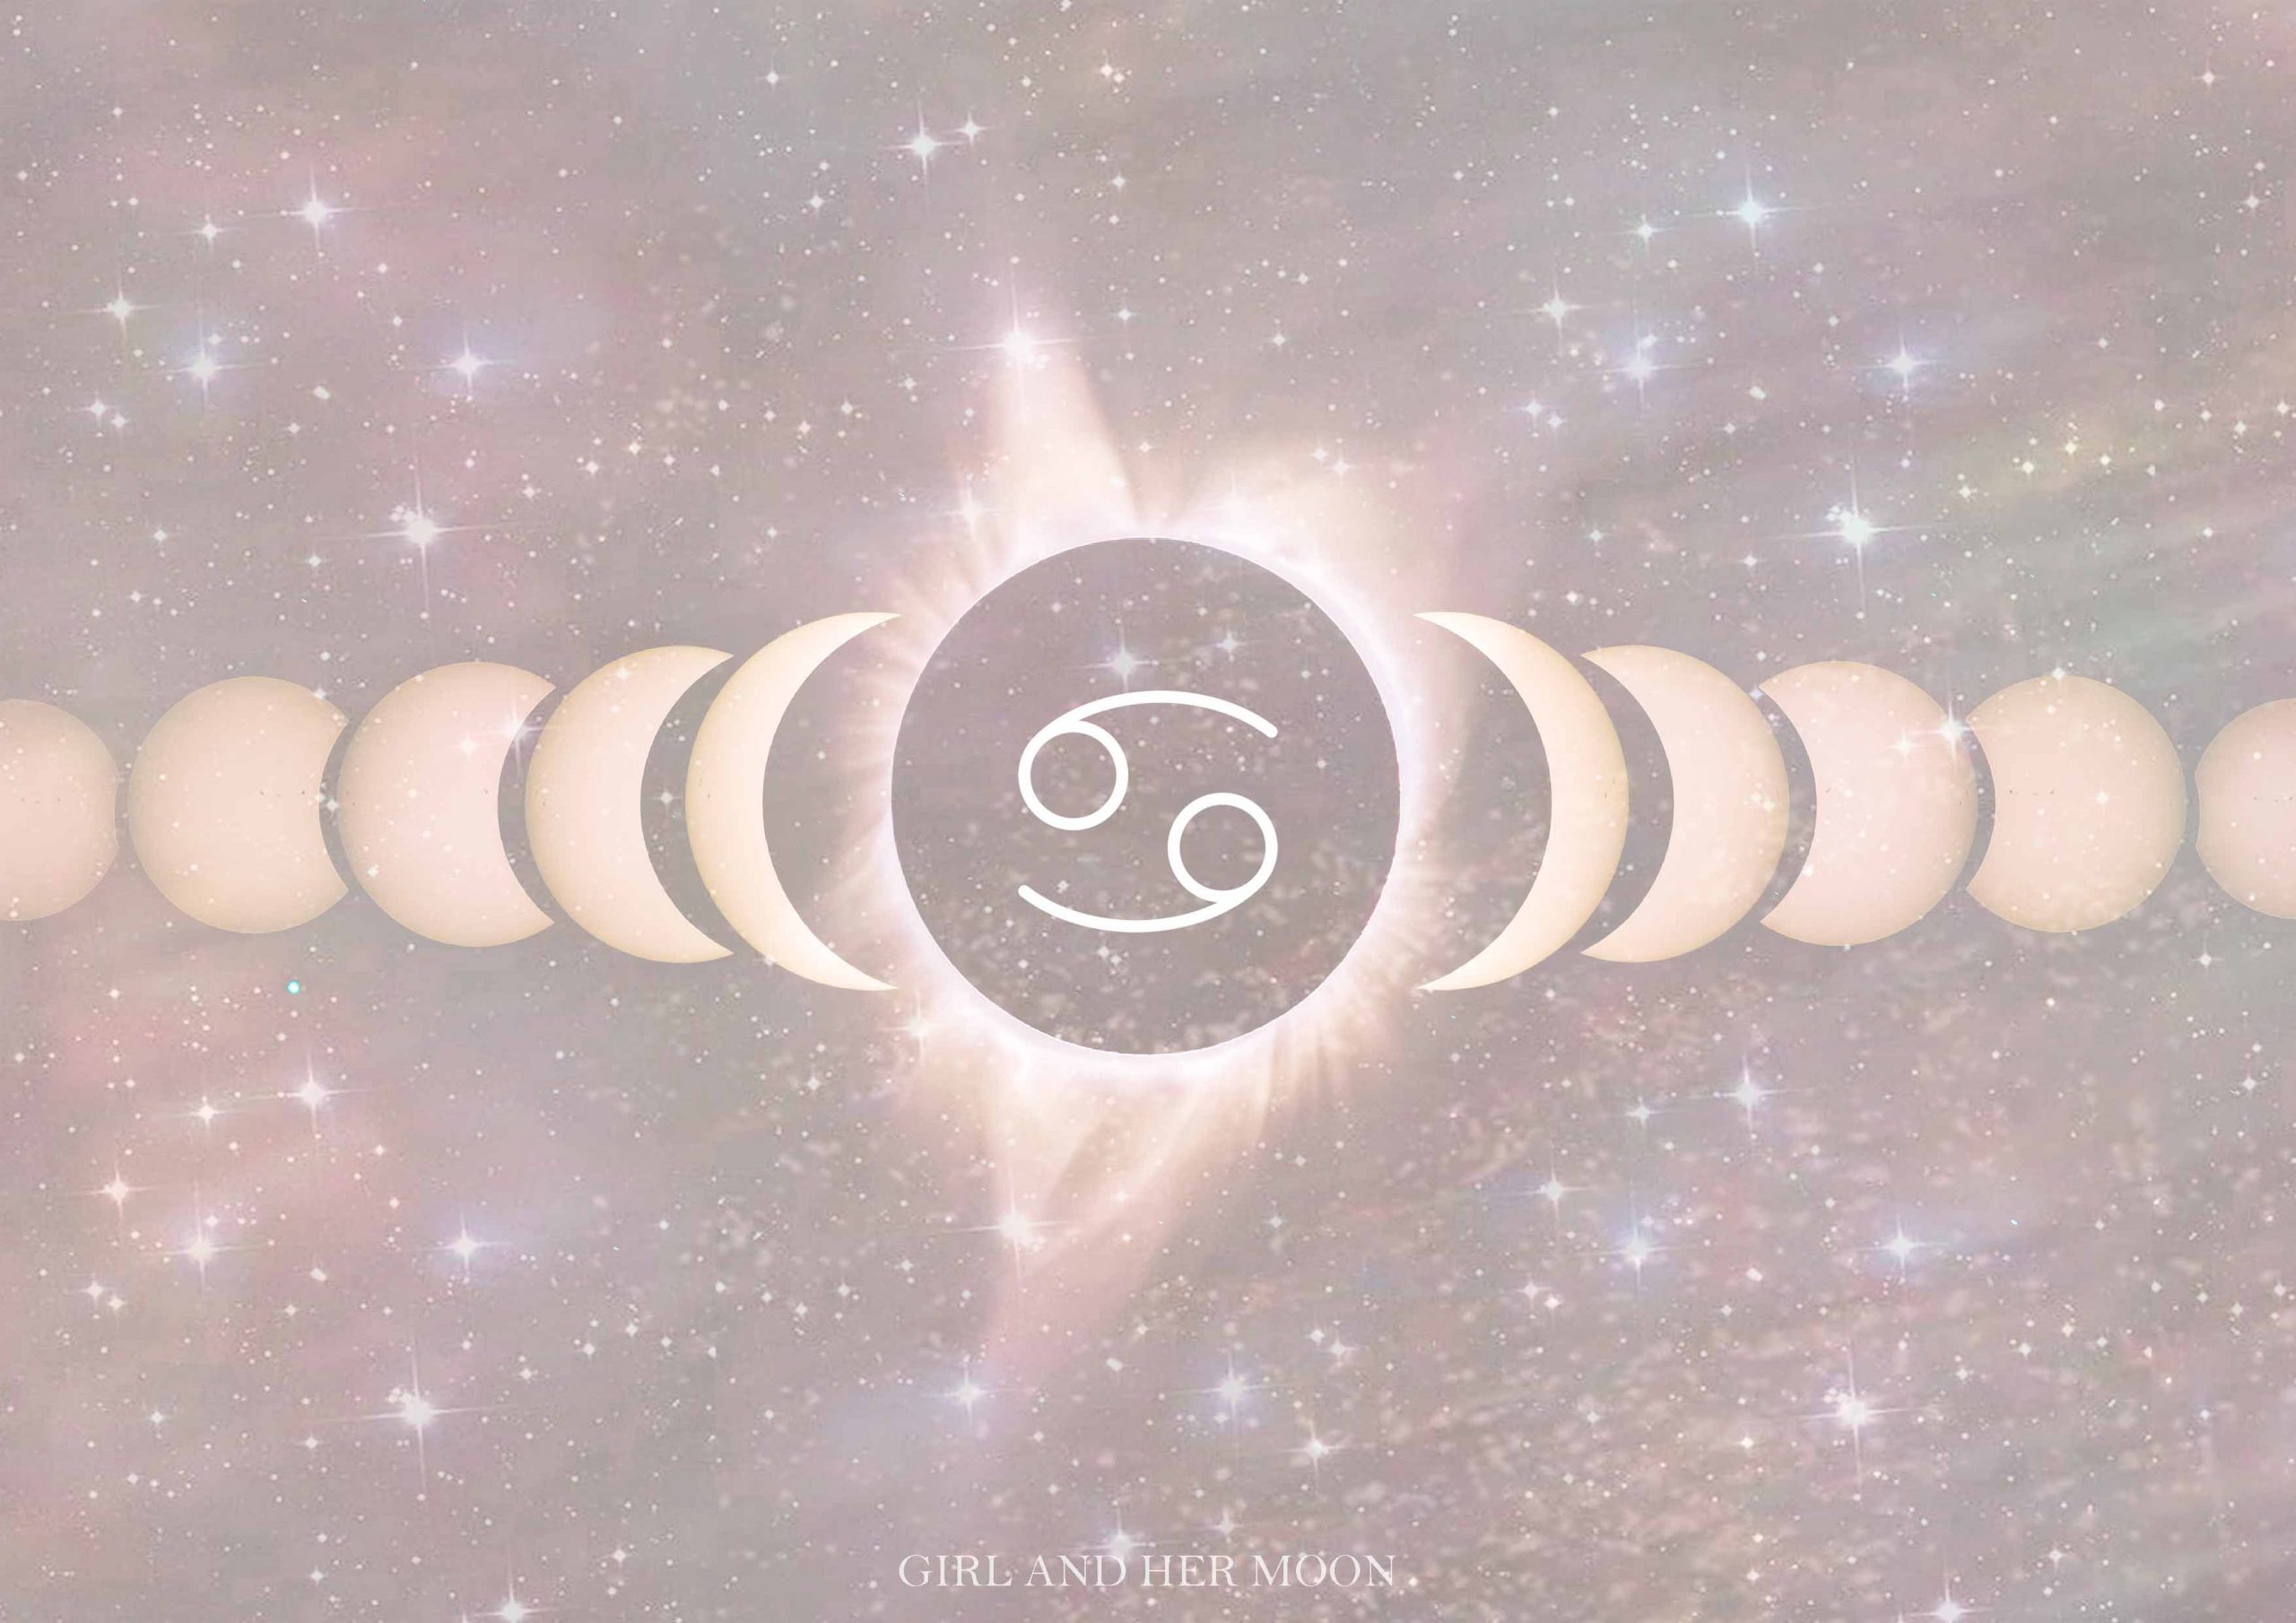 SOLAR ECLIPSE IN CANCER JUNE 2020: HAND IN HAND STEPPING INTO A NEW WORLD - GIRL AND HER MOON